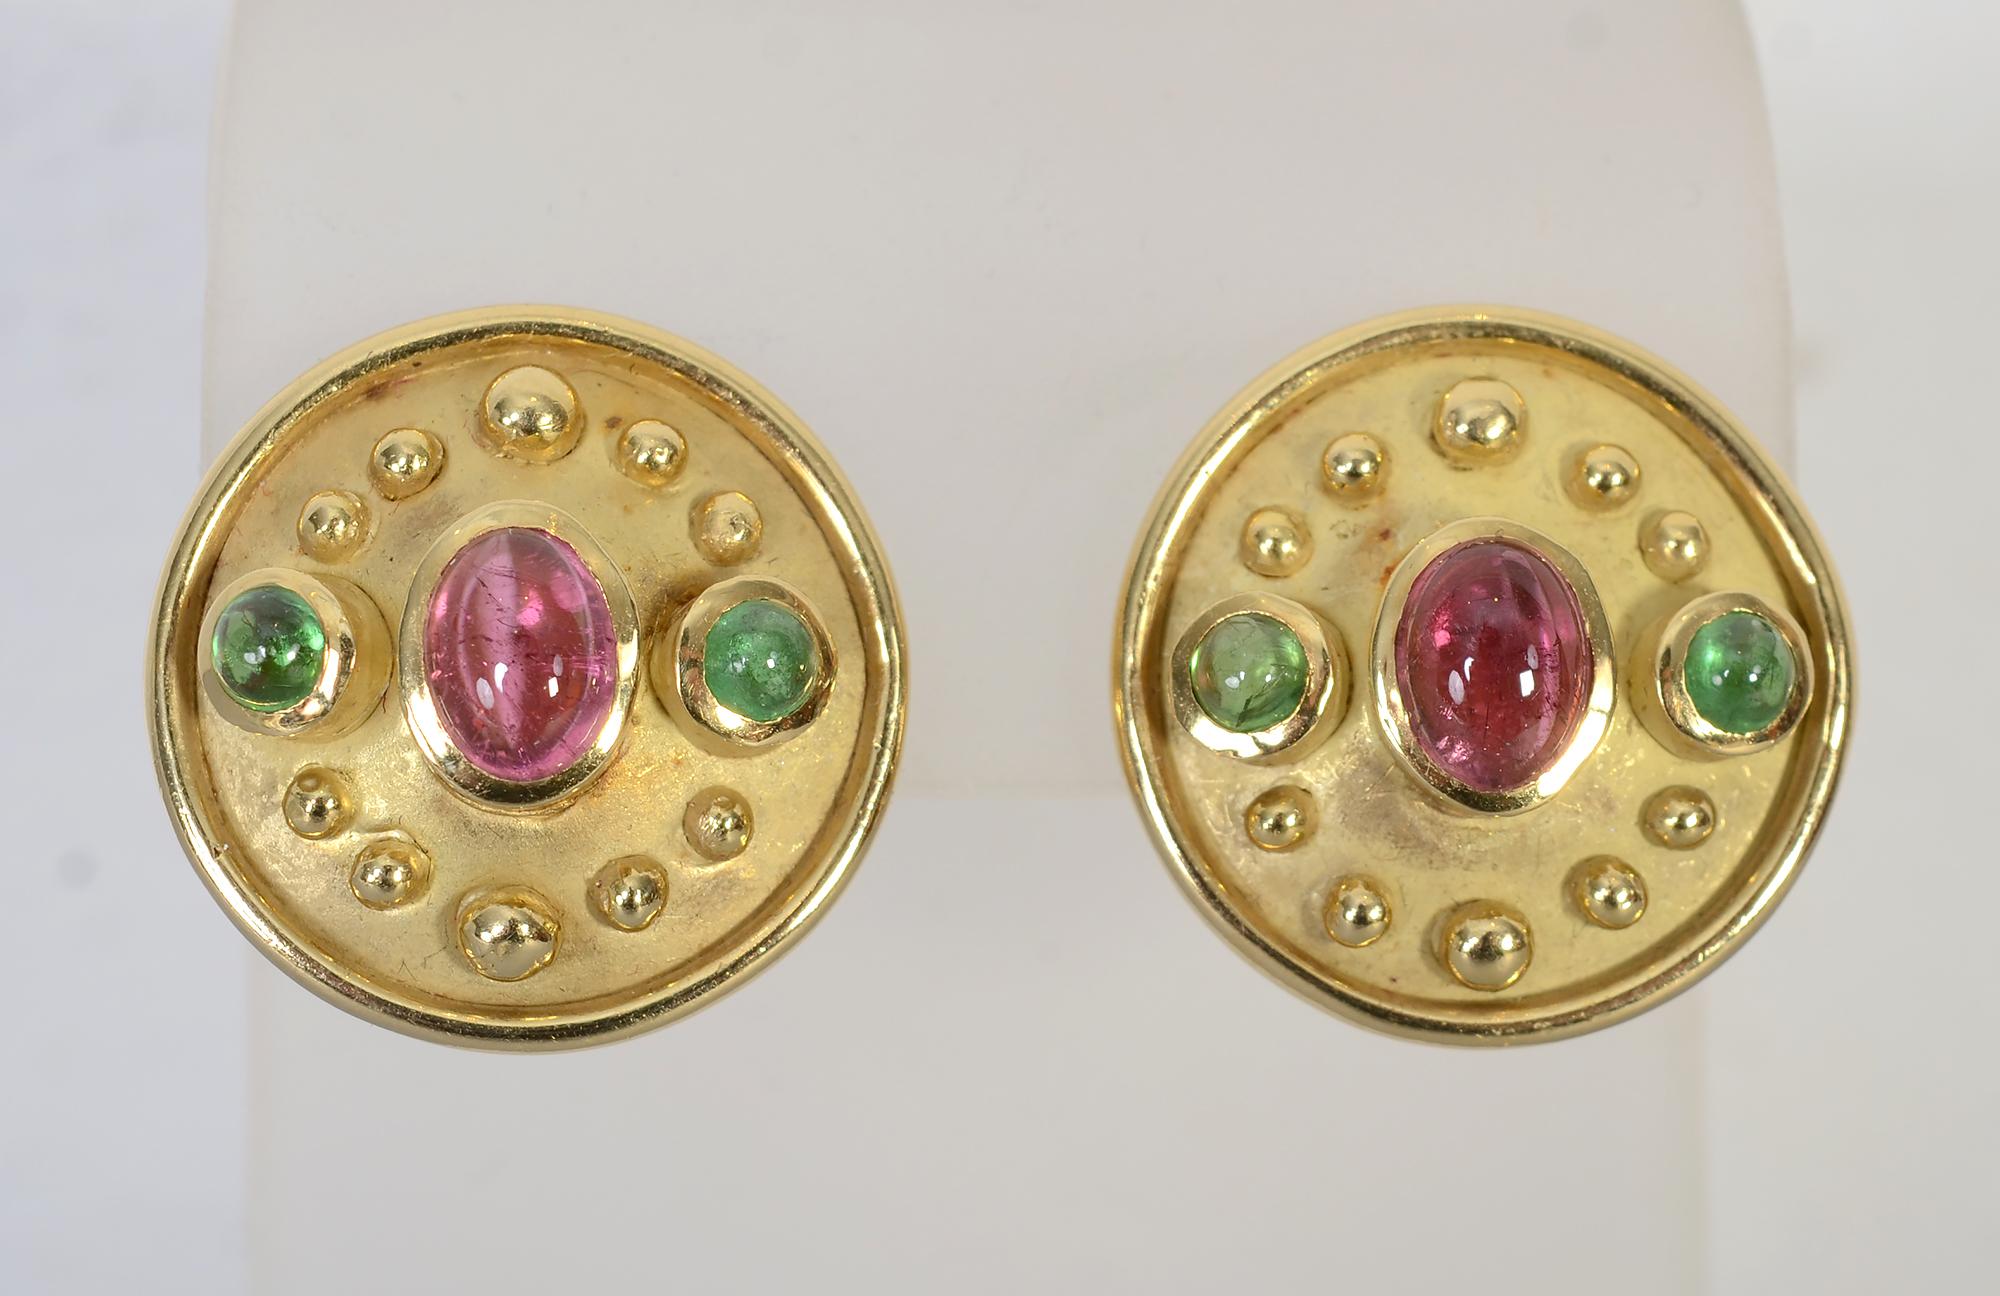 Denise Roberge round 18 karat gold earrings with beautifully colored pink and green tourmalines. The central oval stone is approximately .5 carats and the round green stones are approximately .25 carats each. Gold beading goes around the perimeter